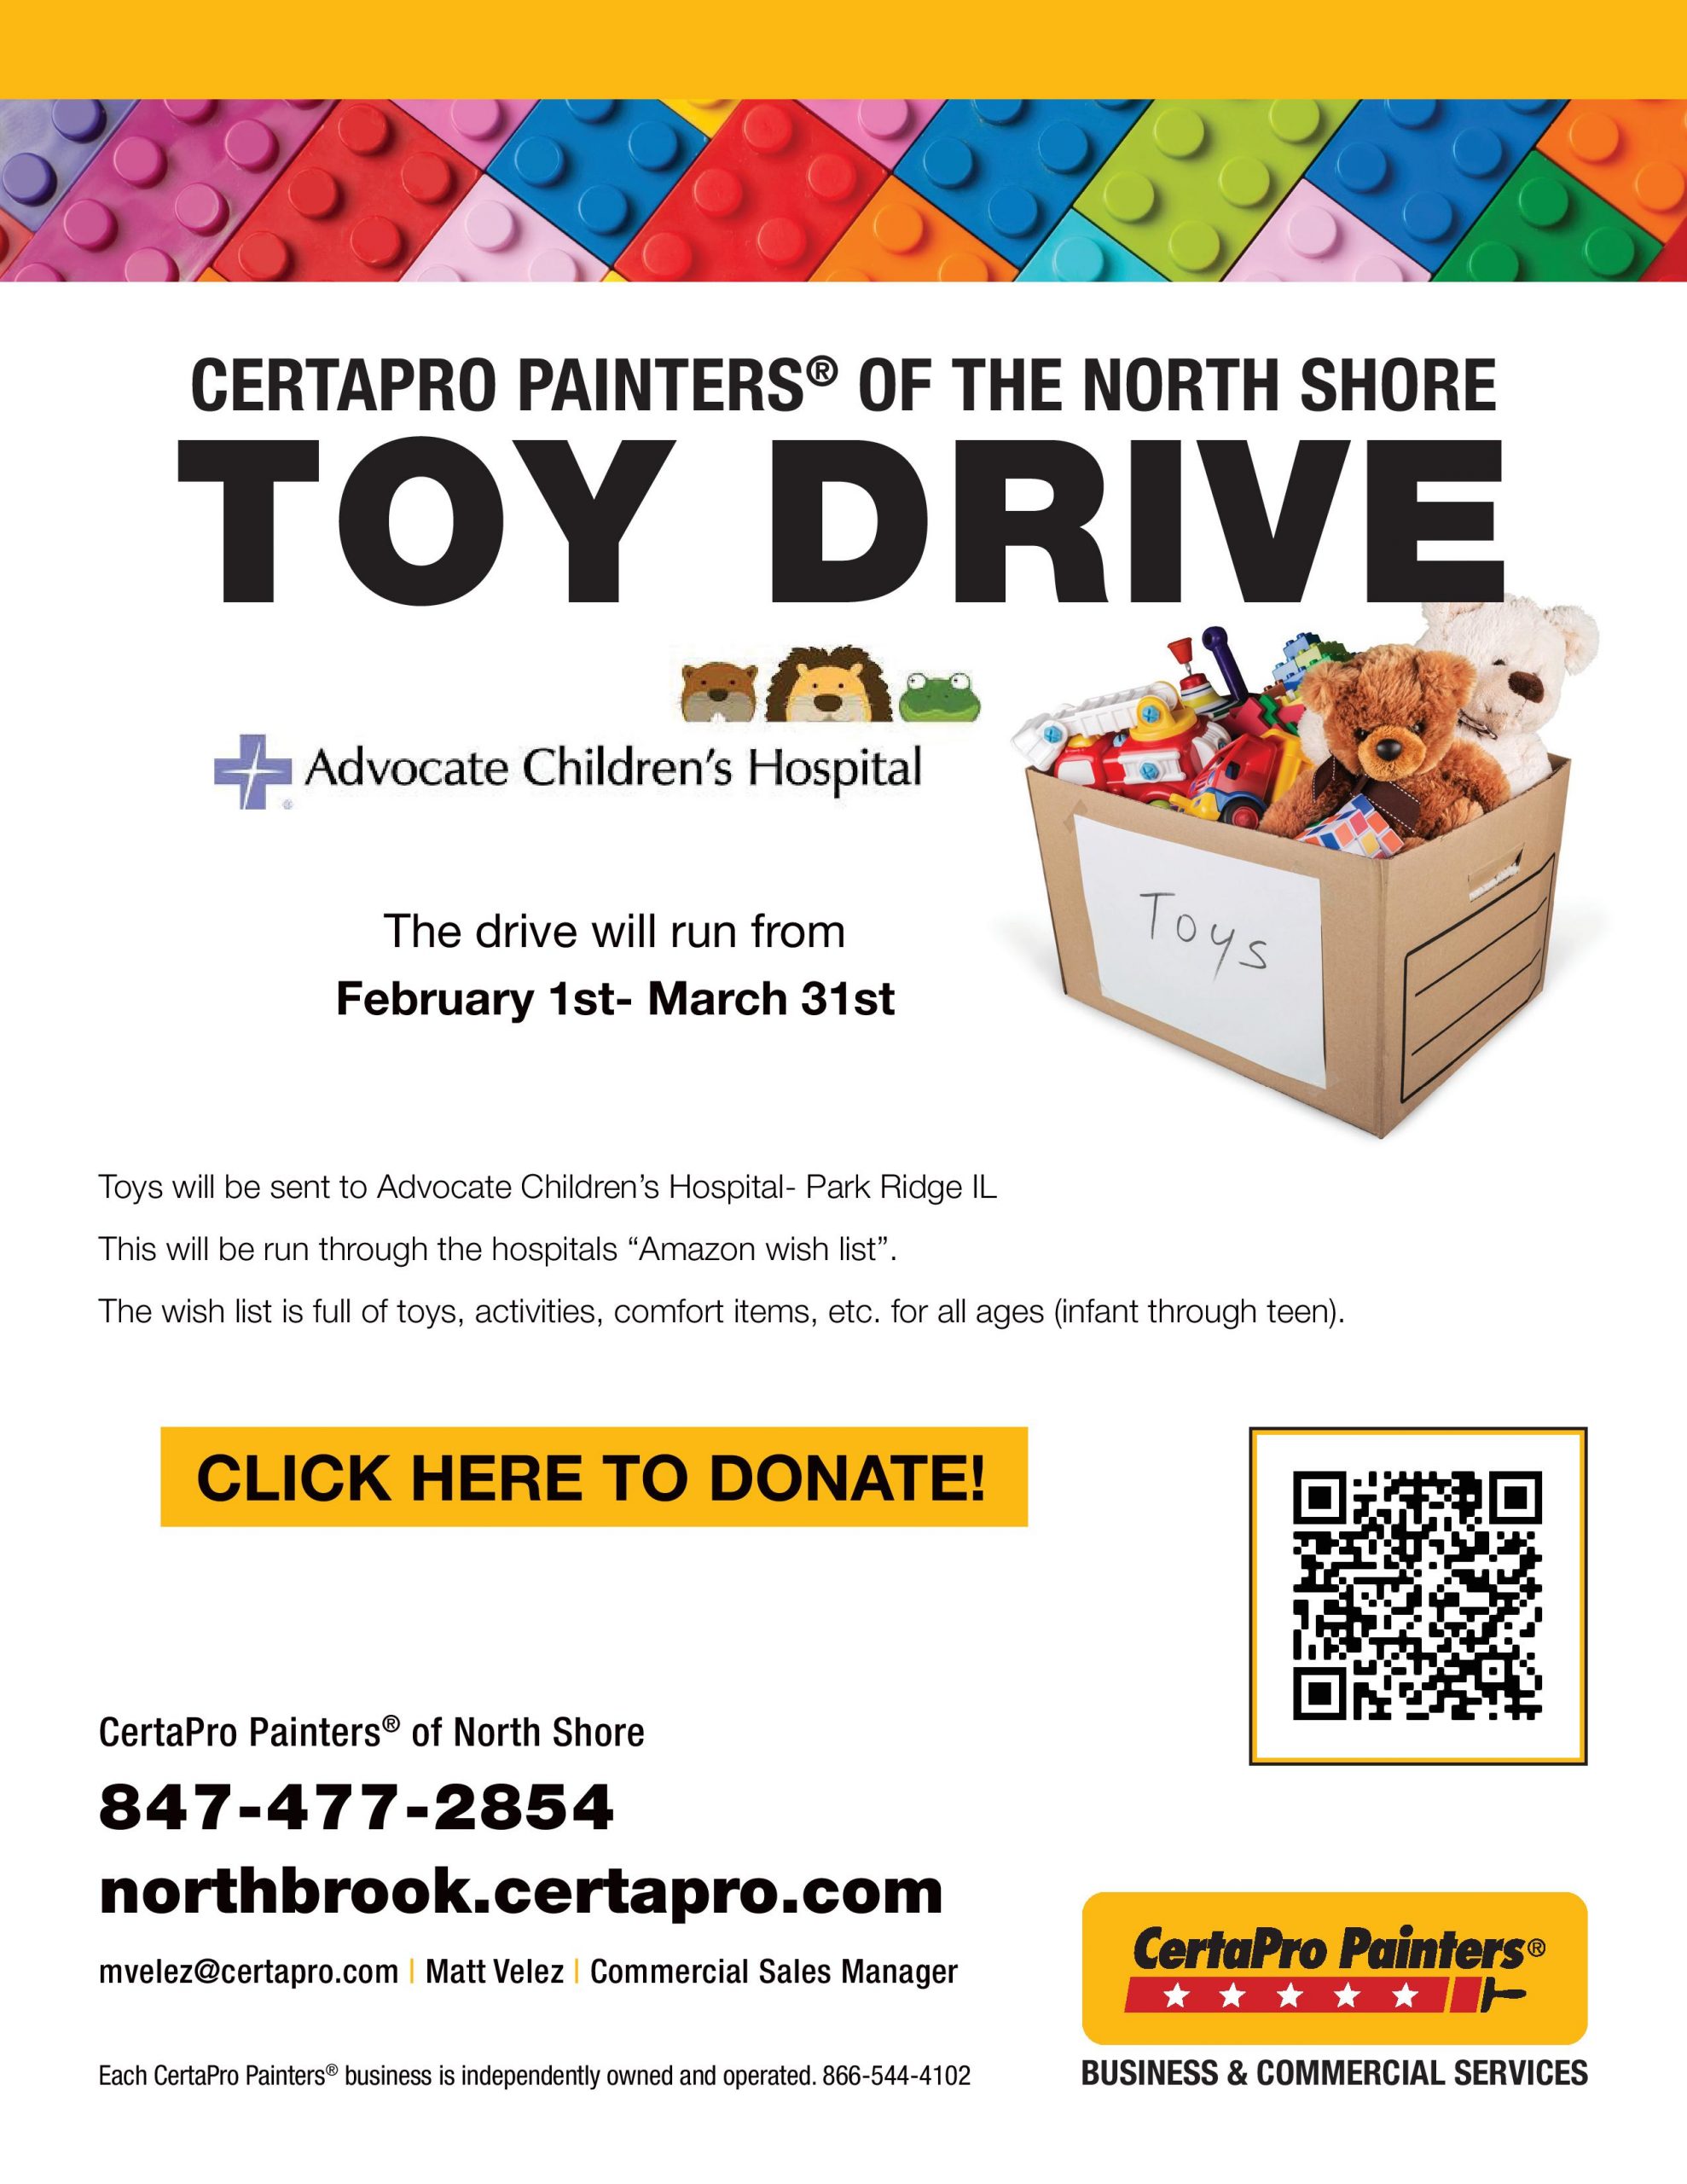 CertaPro Painters of the North Shore Toy Drive | Professional Painting Company